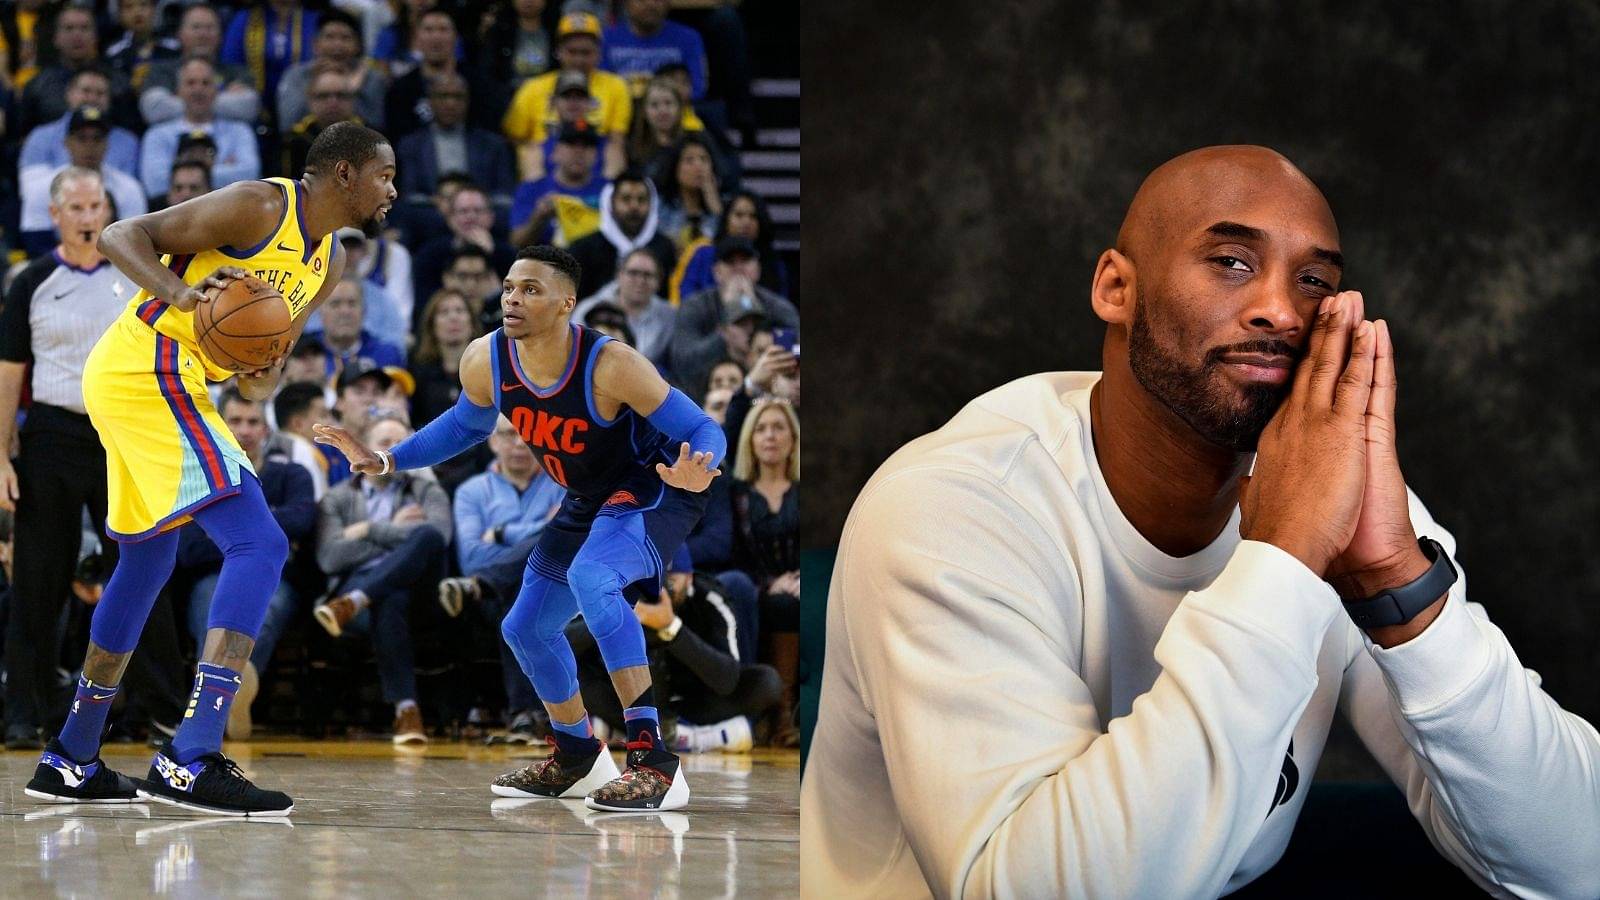 "Russell Westbrook, why do you keep letting KD win the scoring titles??": Kobe Bryant manipulated Brodie during the 2012 Olympics to create friction in Oklahoma City says Woj